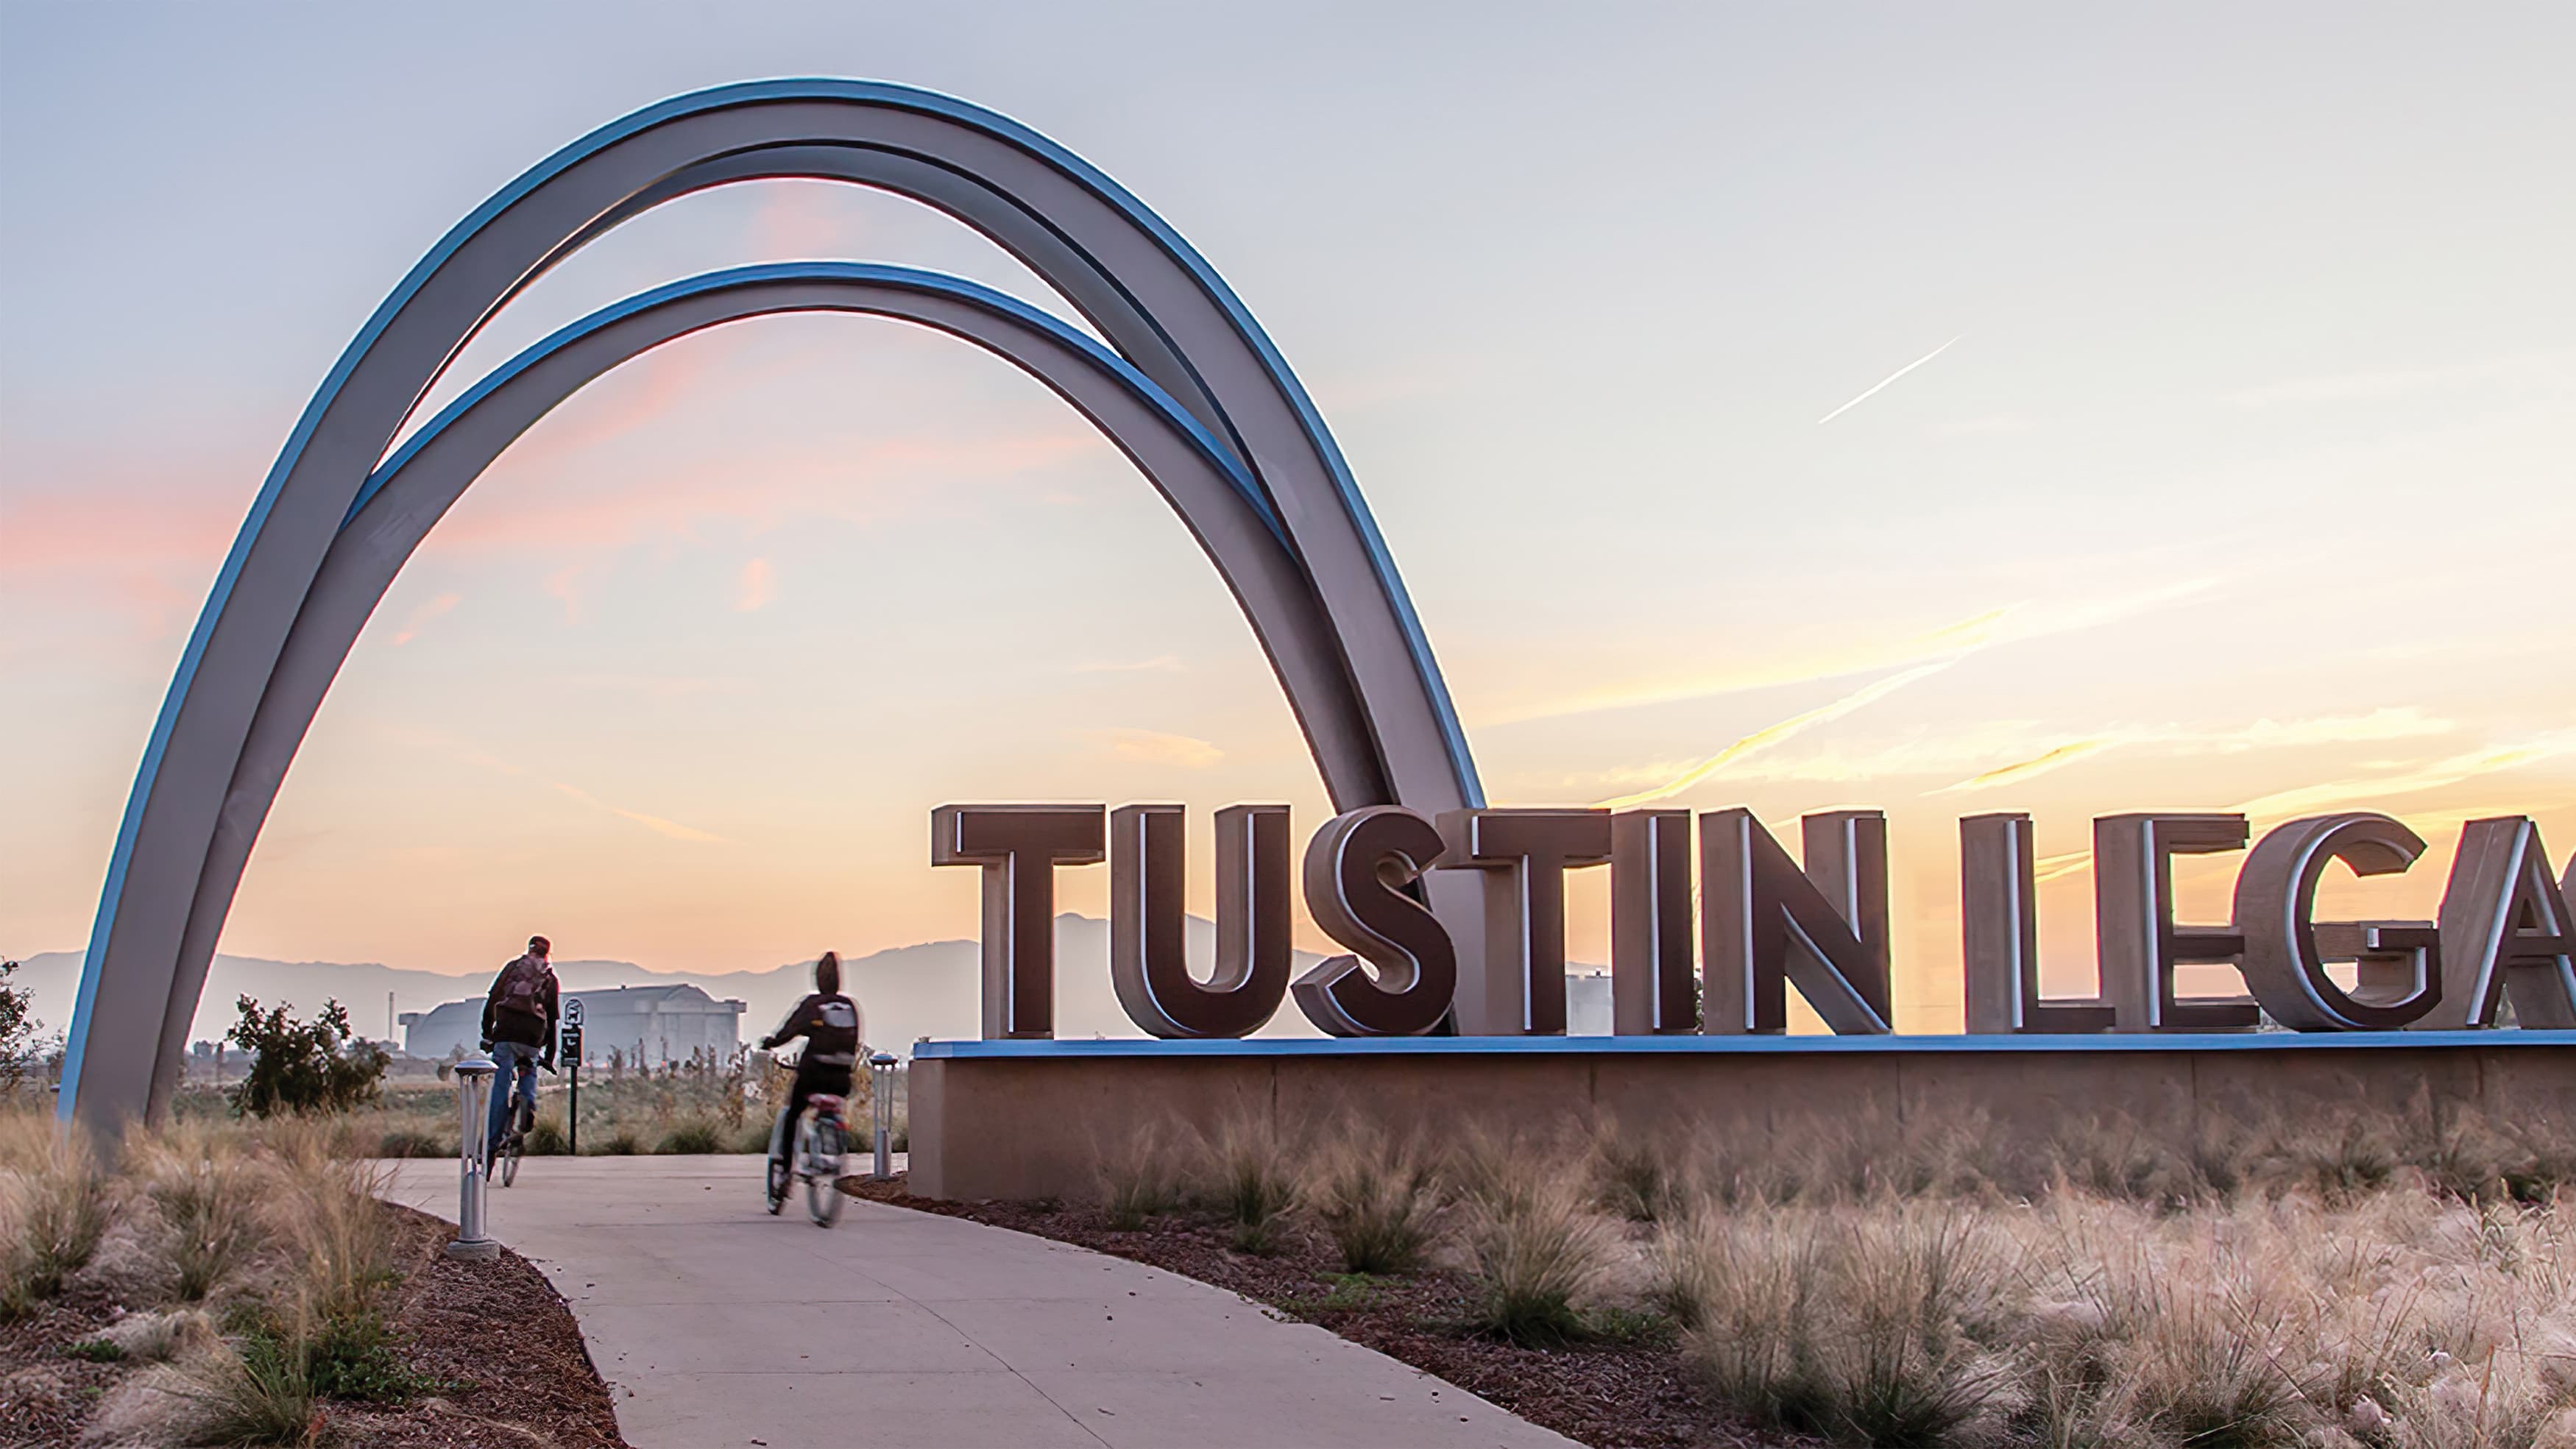 A photograph of a monument sign at Tustin Legacy featuring an arch and large fabricated letters.